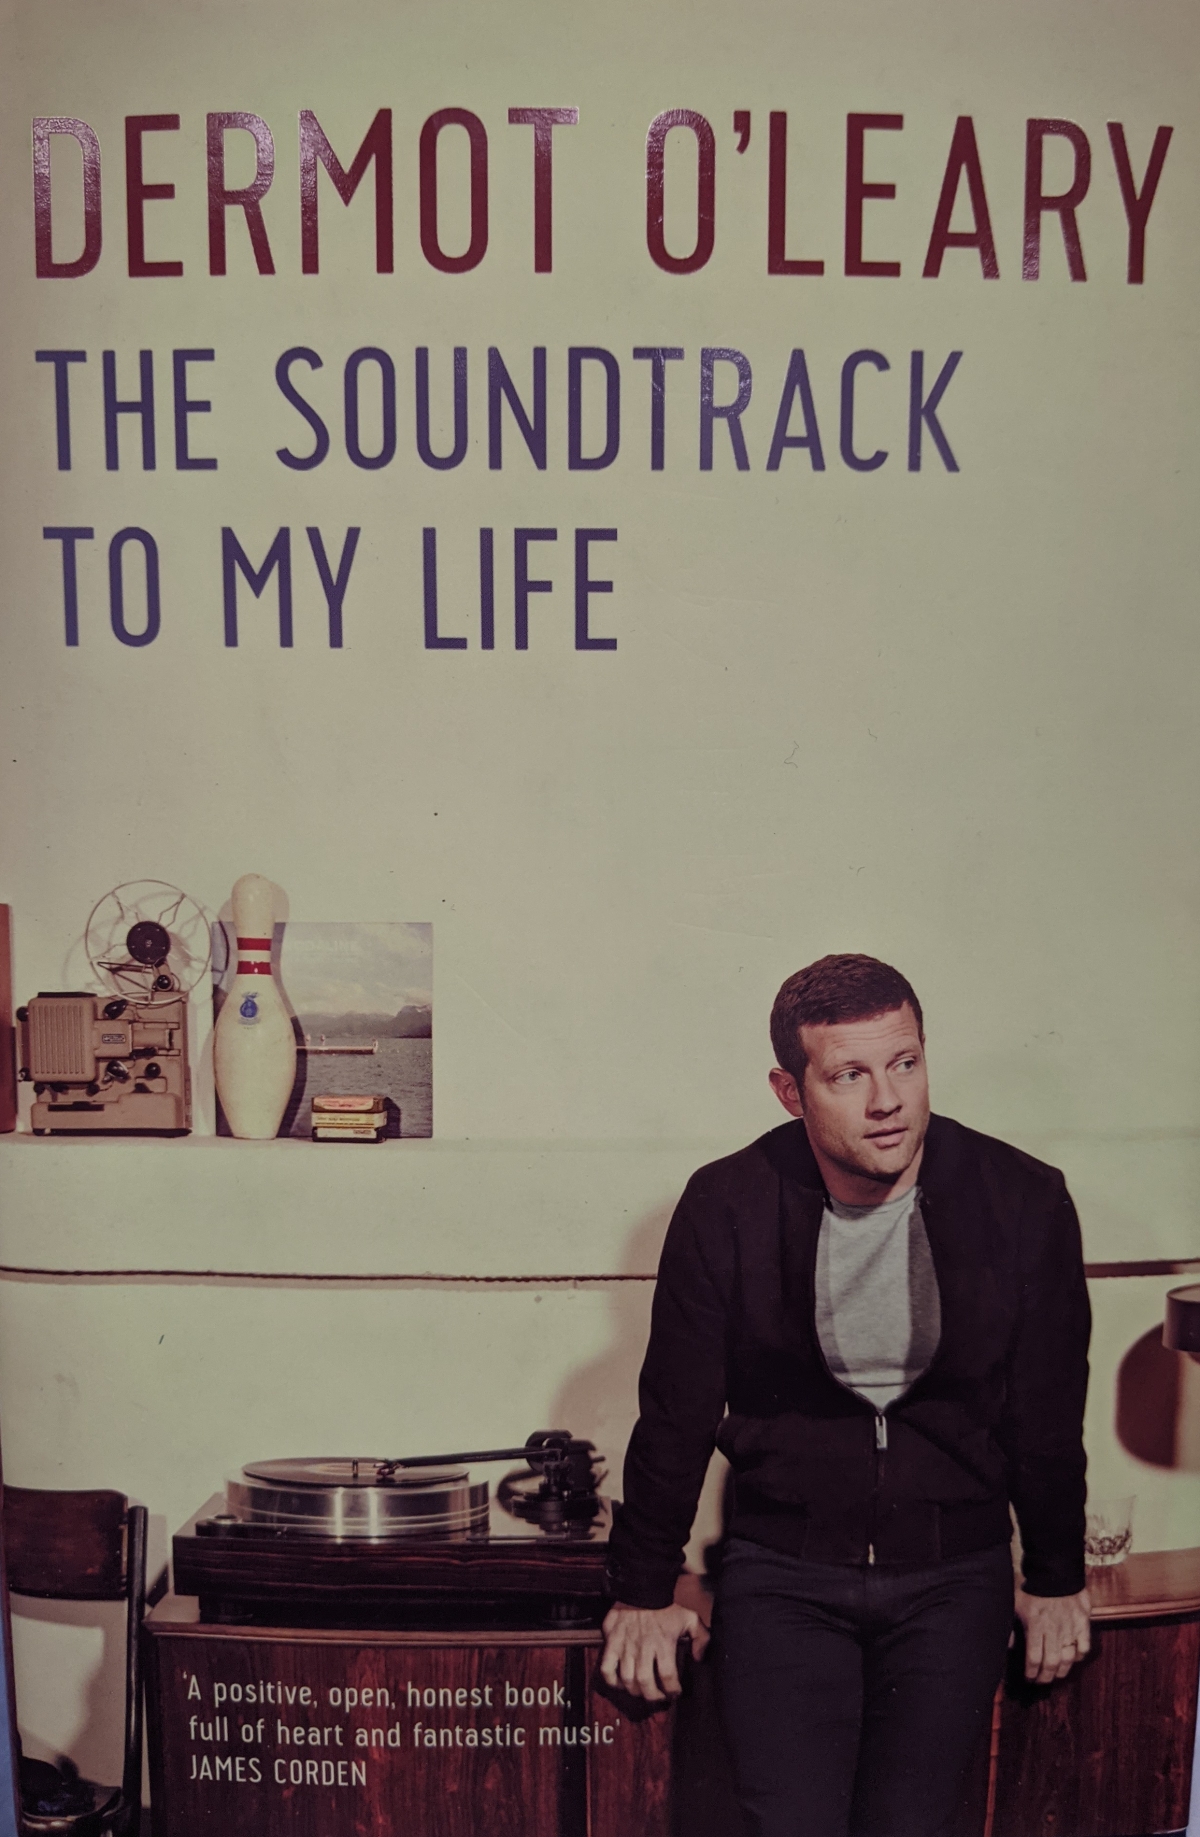 Book Review – The Soundtrack to My Life by Dermot O’ Leary